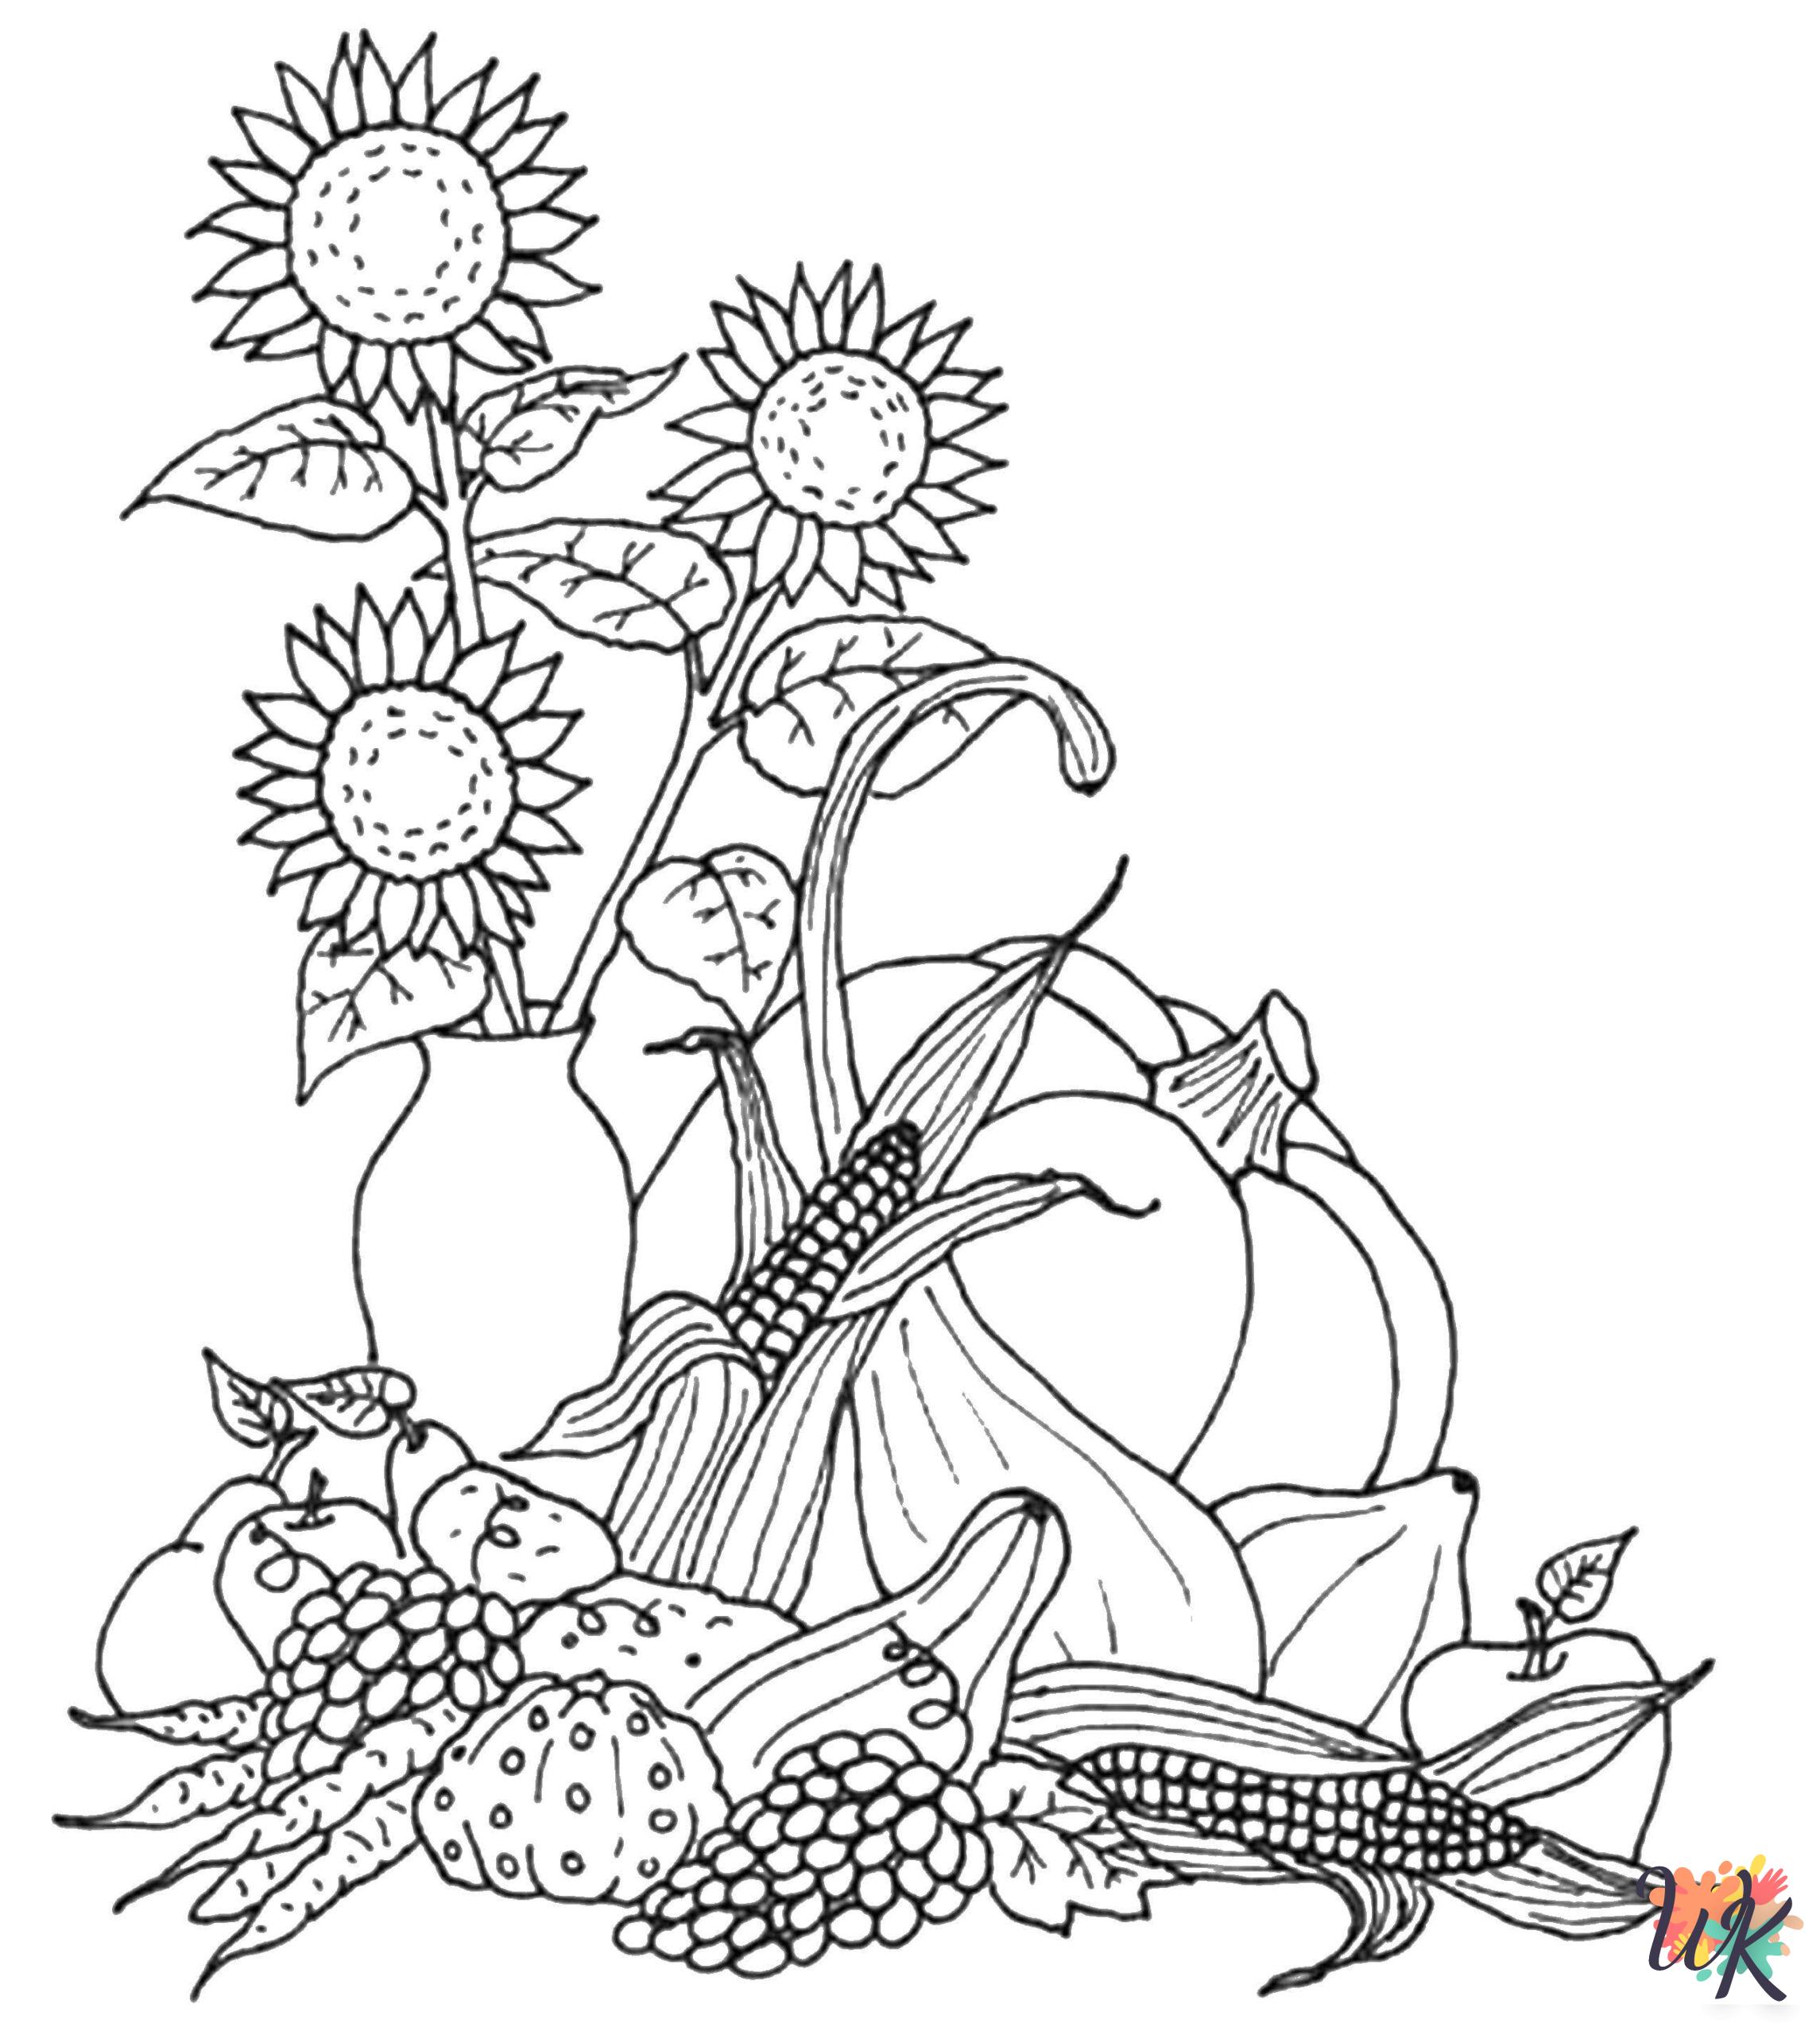 Autumm coloring pages for adults pdf